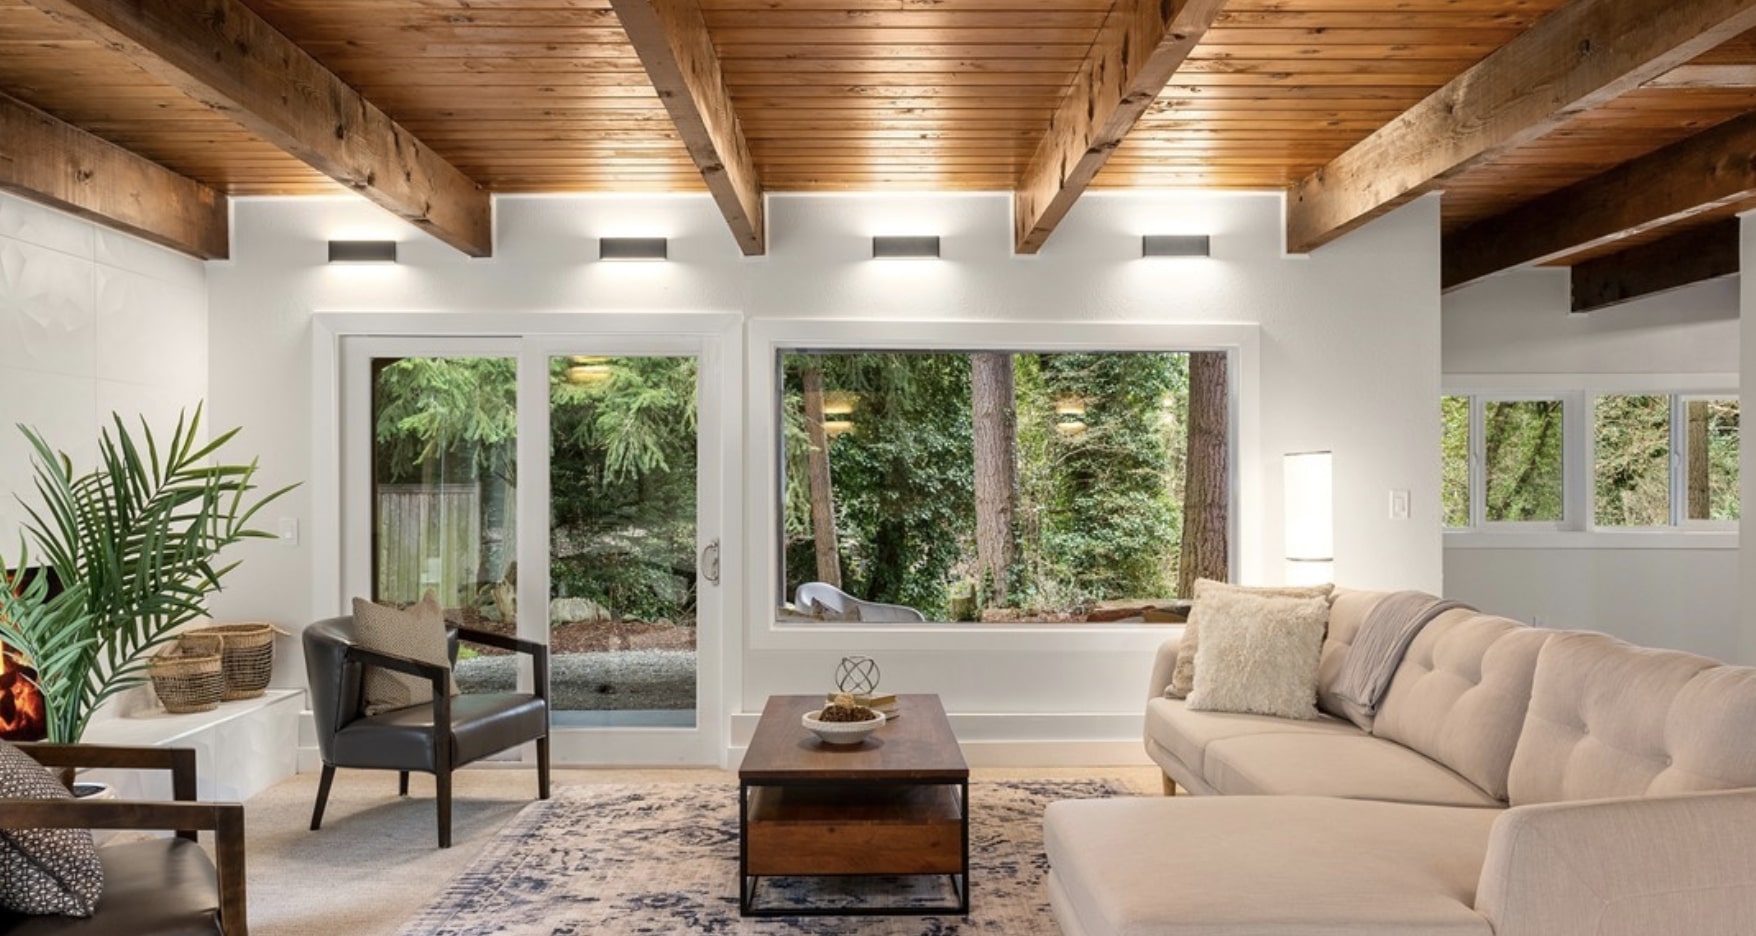 Spacious casual family room featuring wood beams and shiplap ceiling